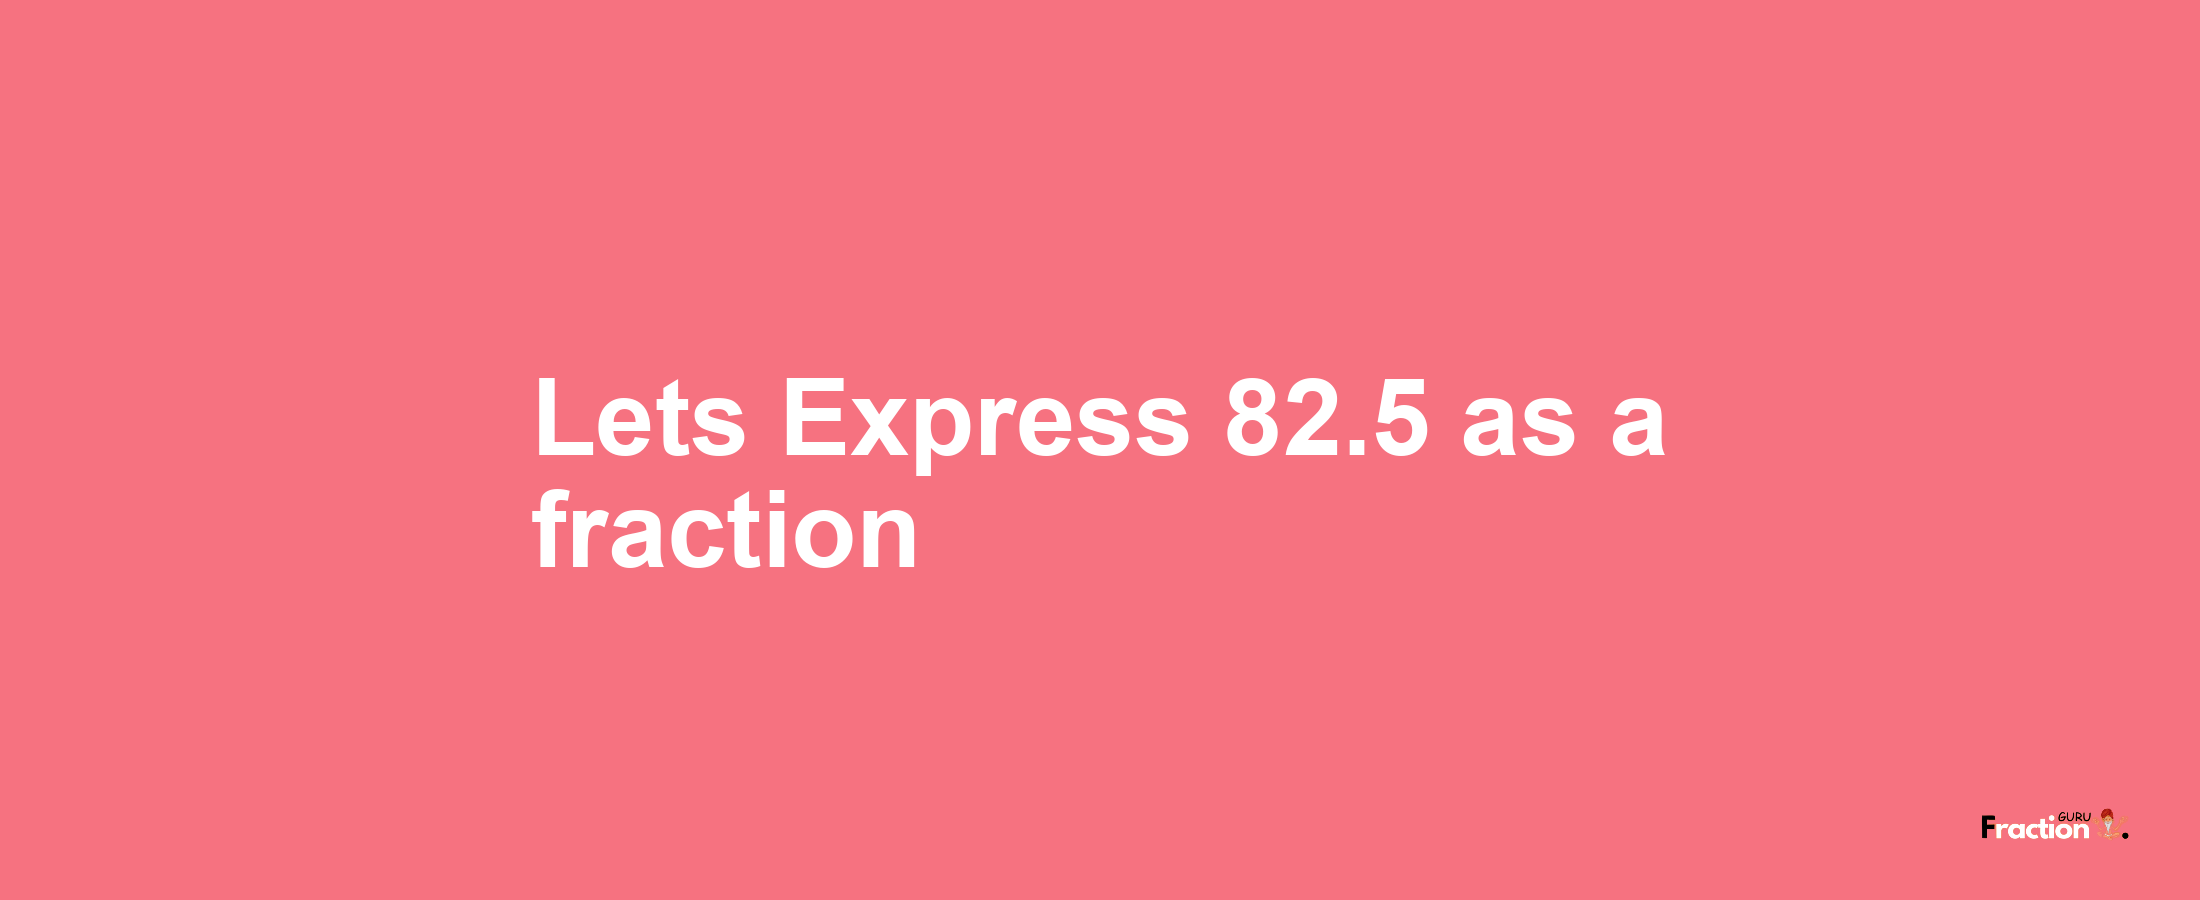 Lets Express 82.5 as afraction